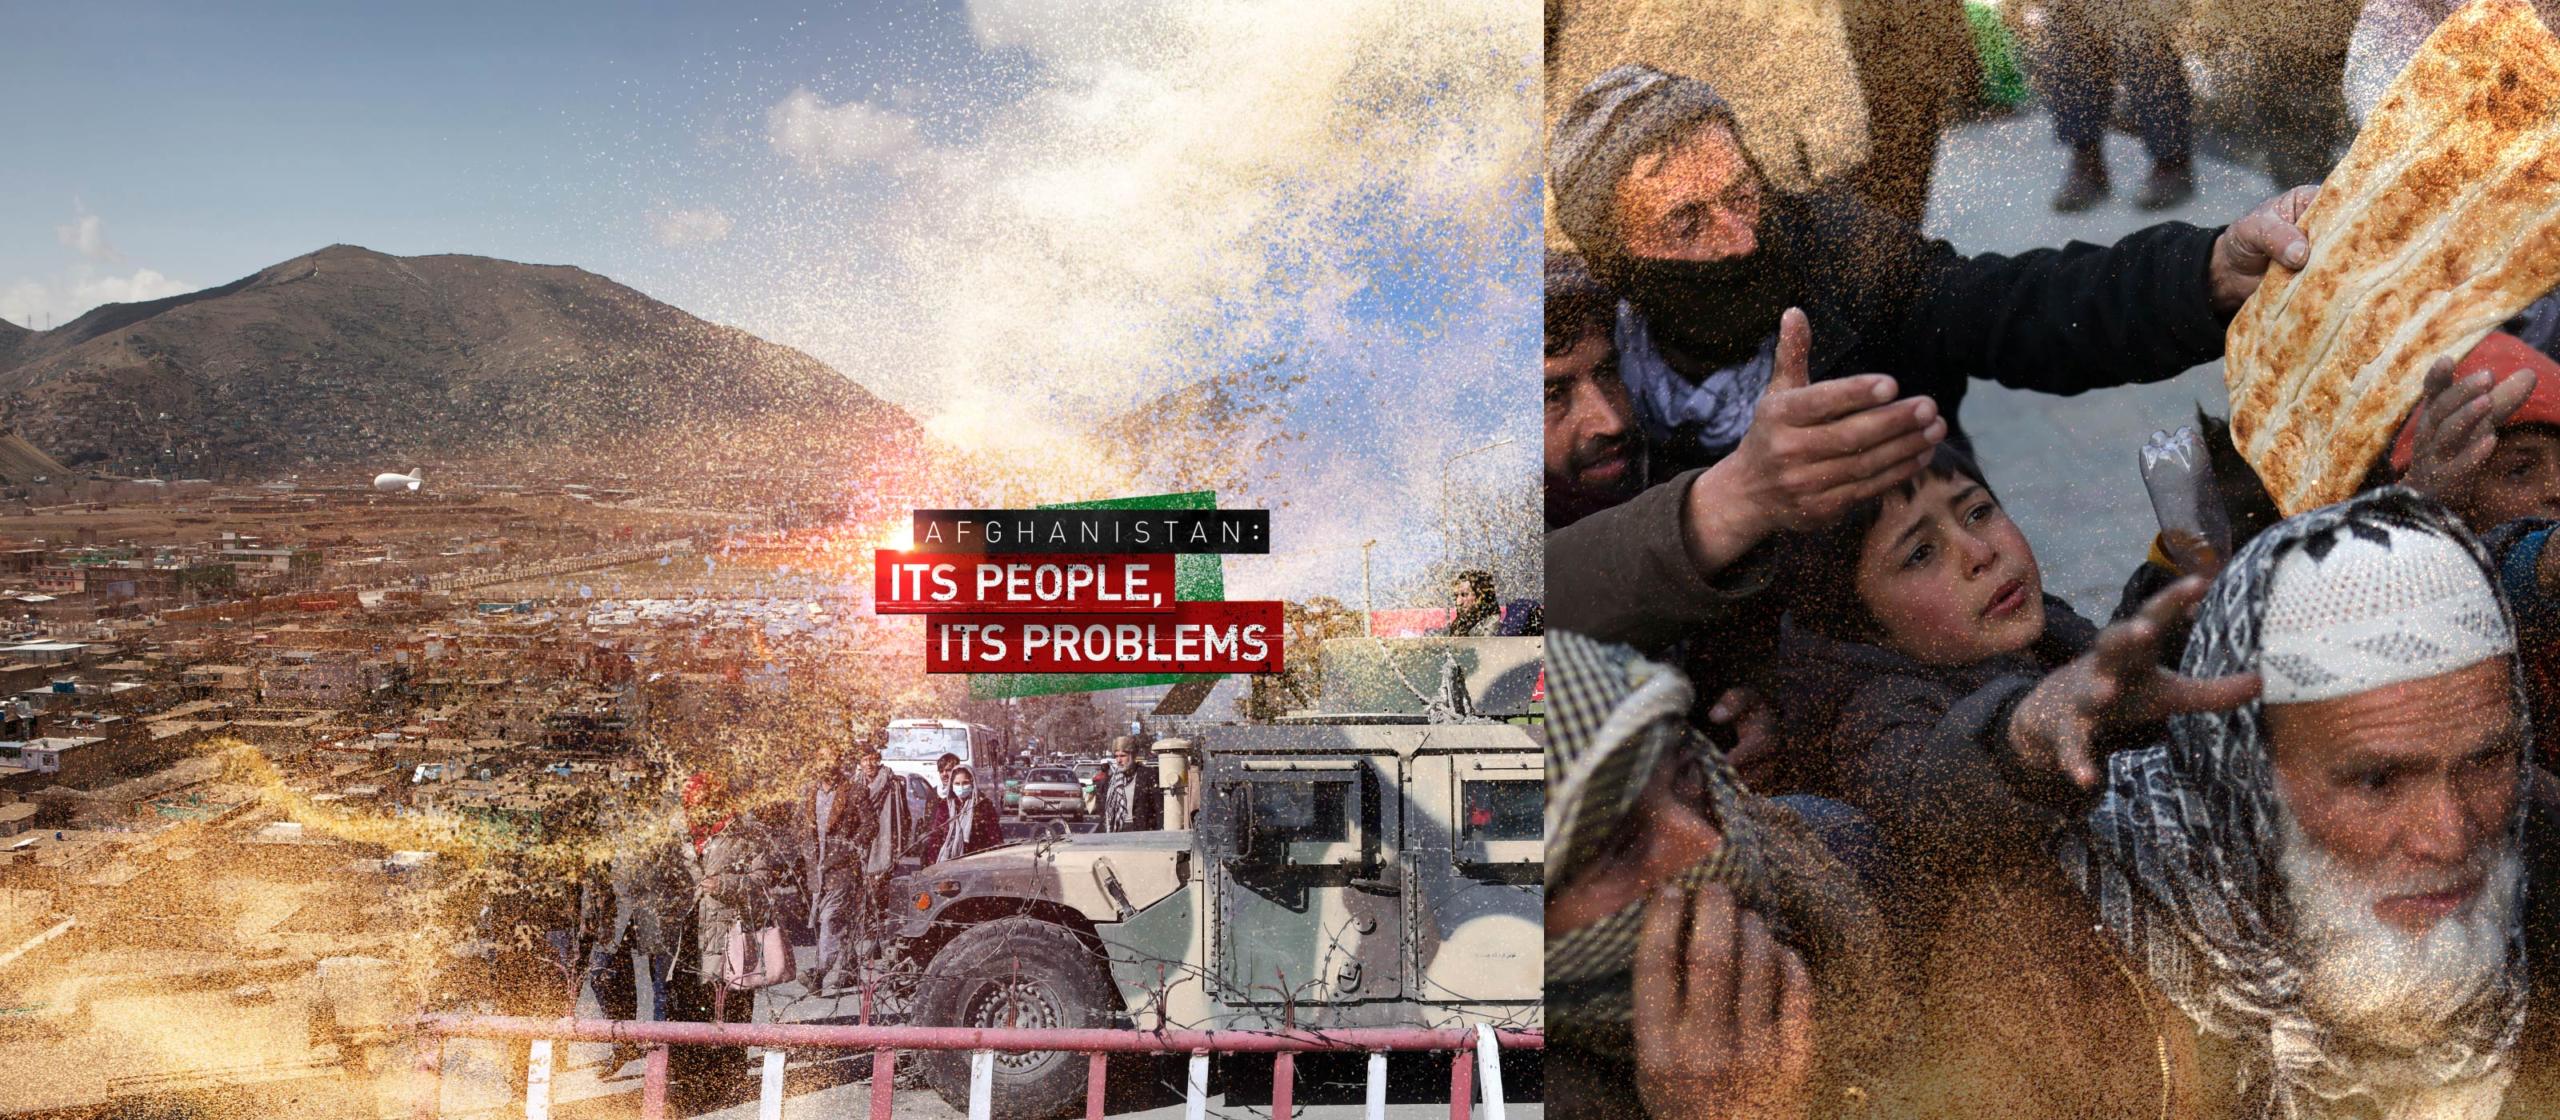 Afghanistan: Its People, Its Problems